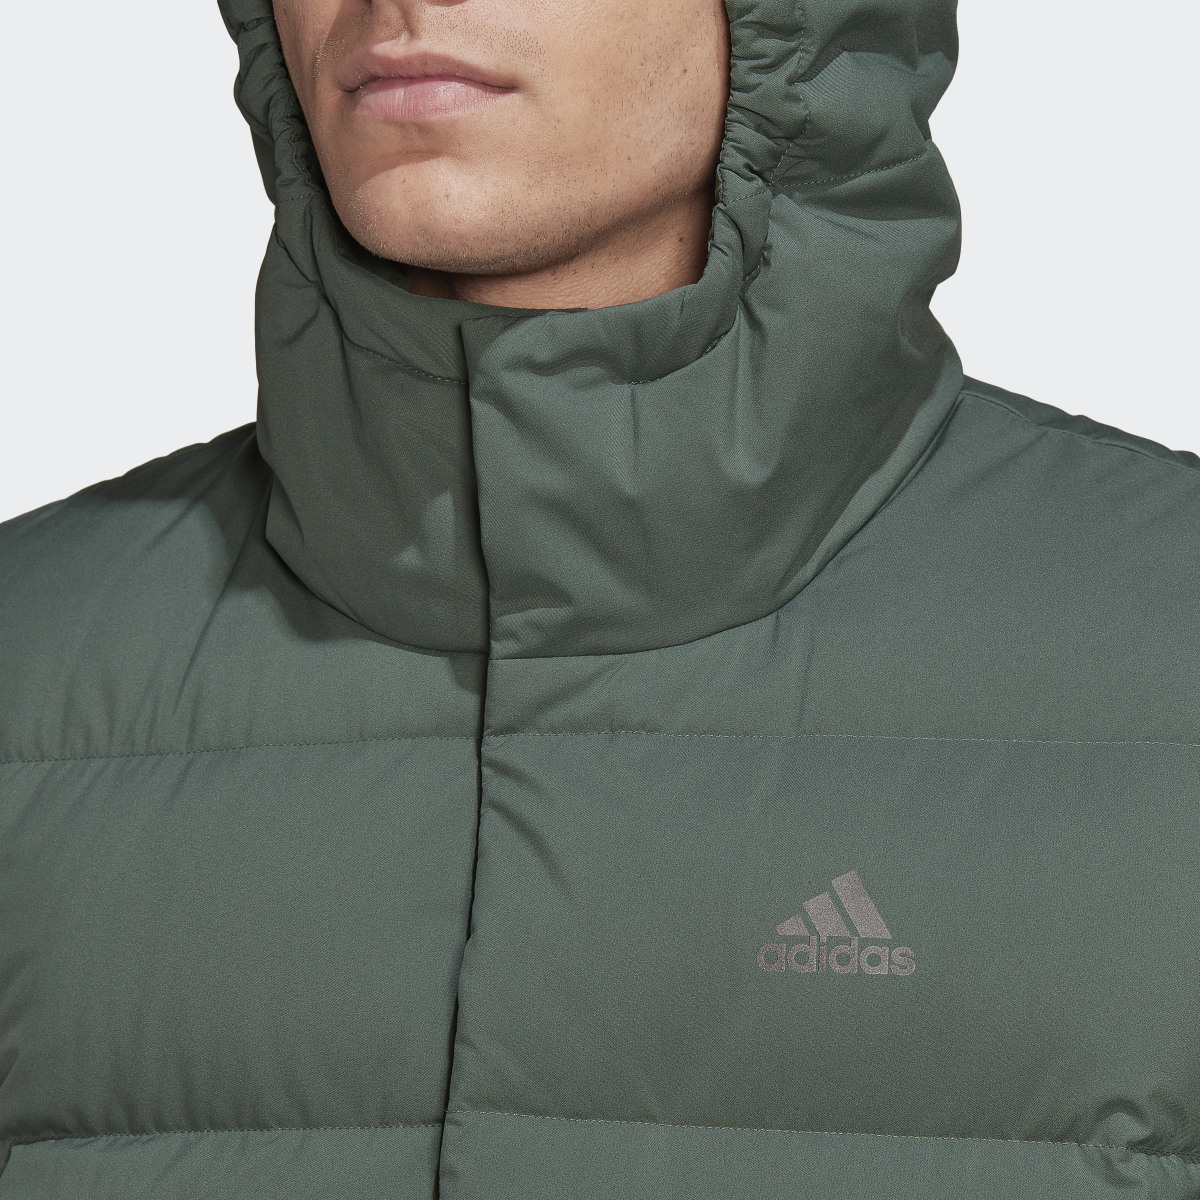 Adidas Helionic Hooded Down Vest. 9